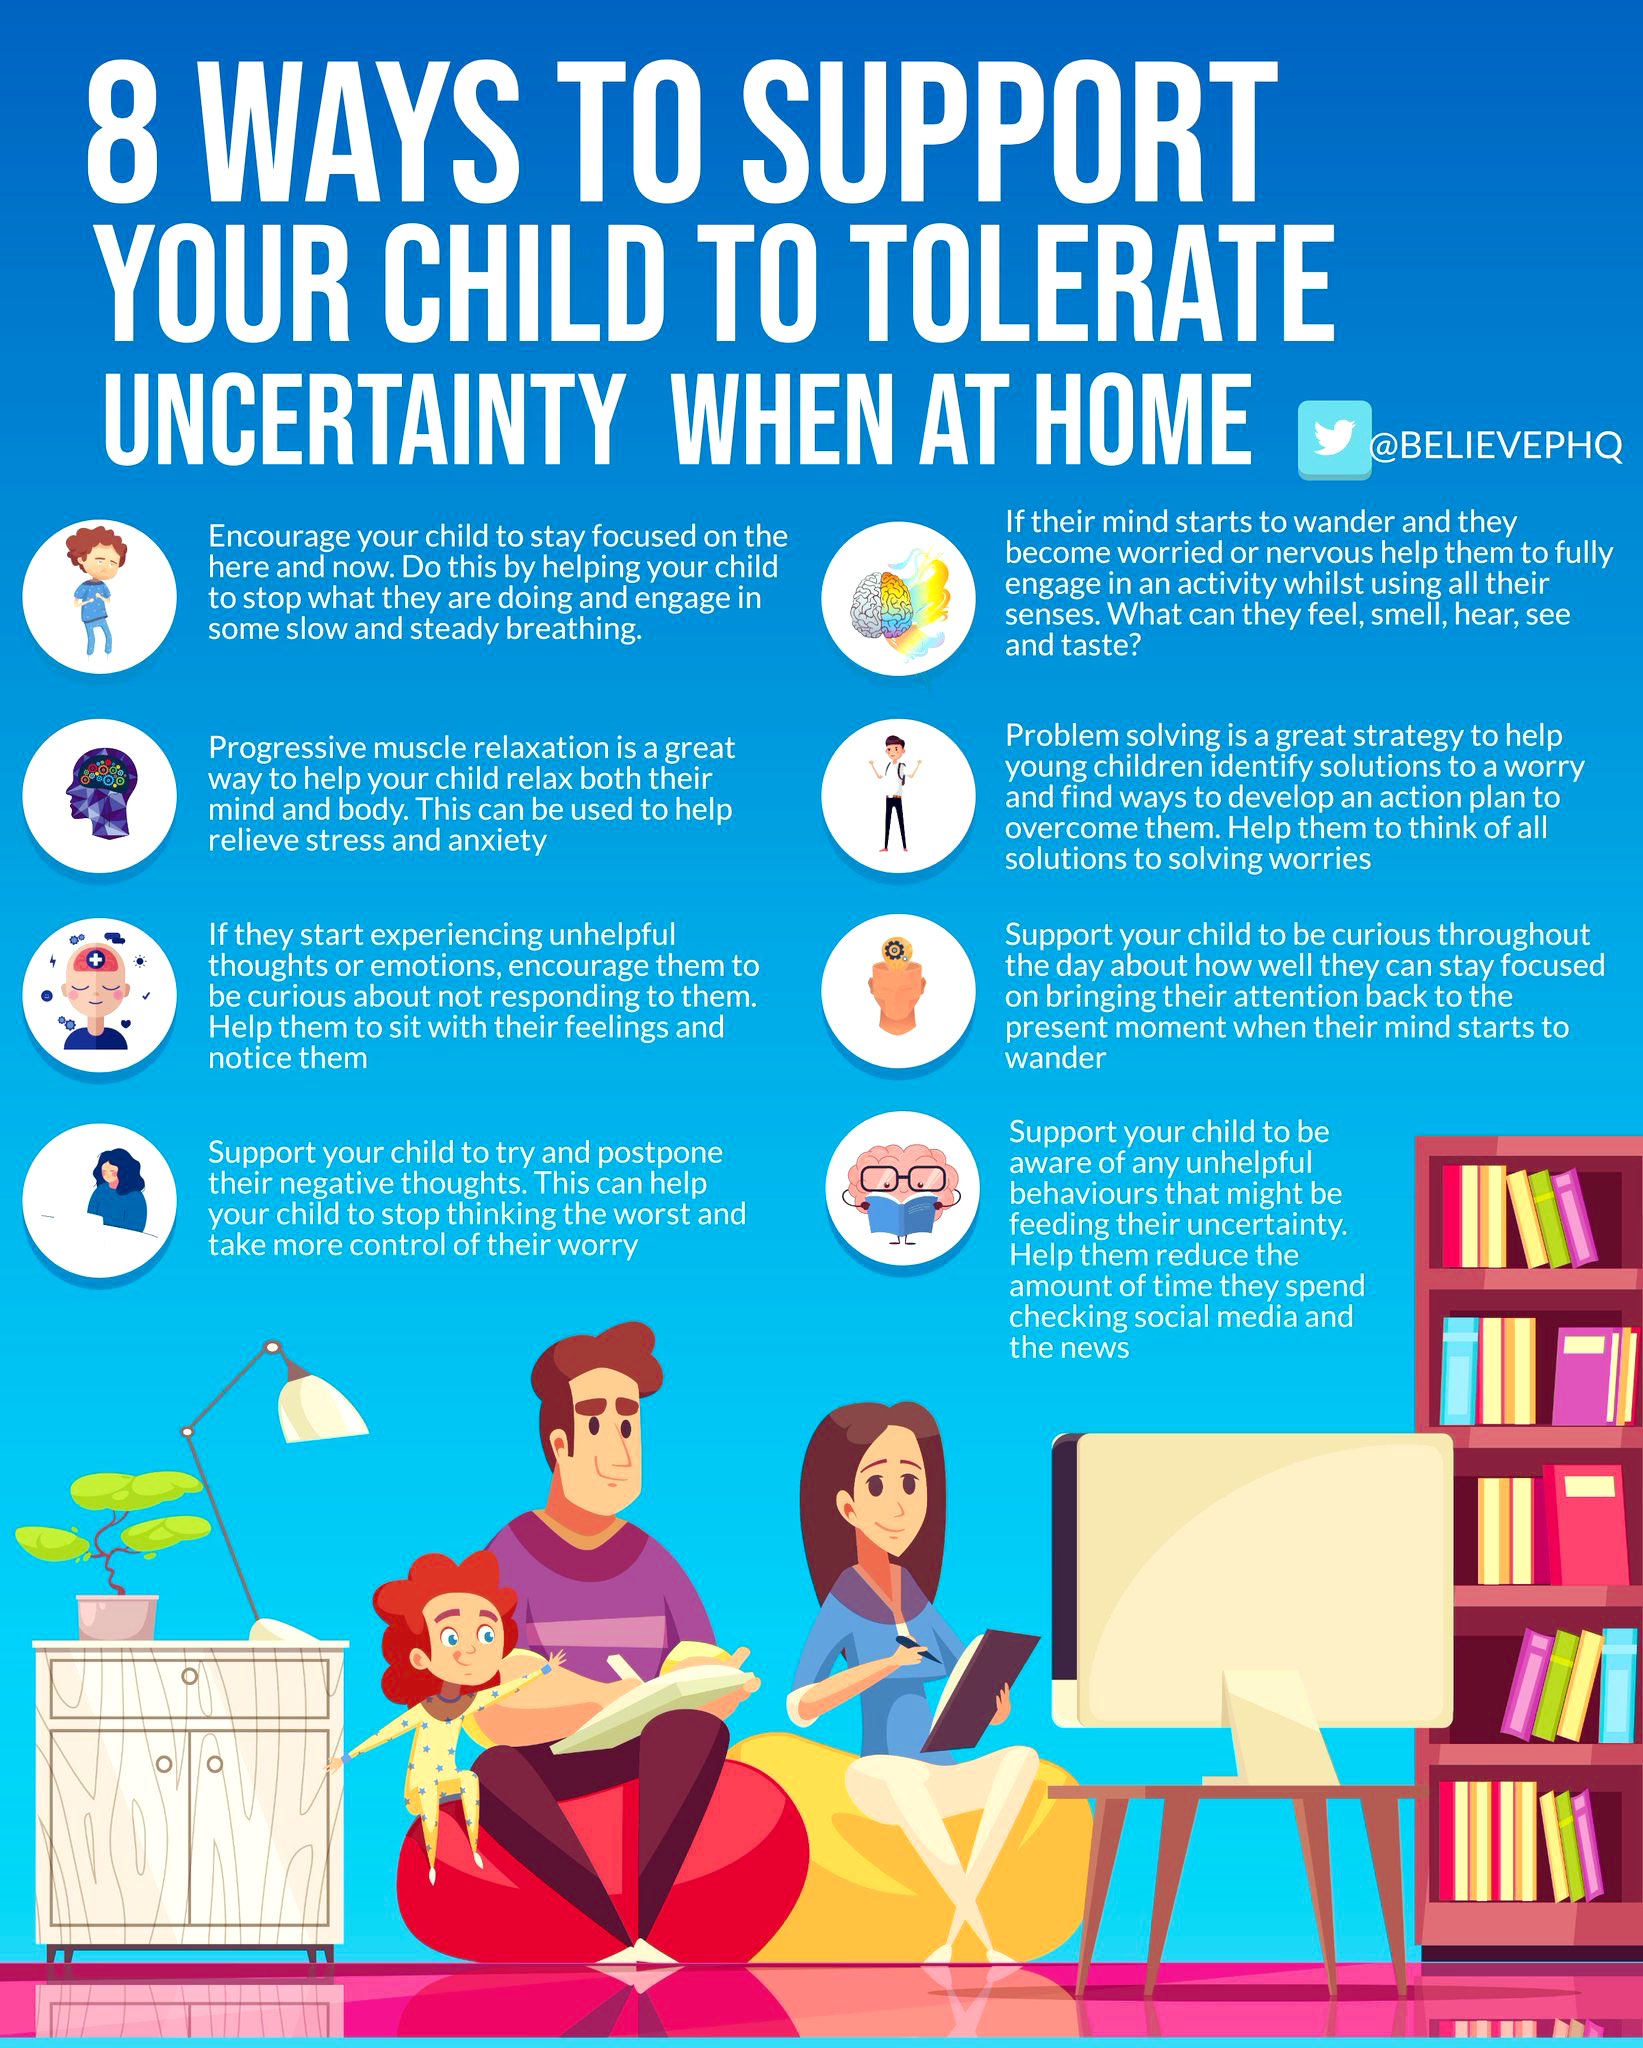 supporting-your-child-tolerating-uncertainty.5a147652801.jpg